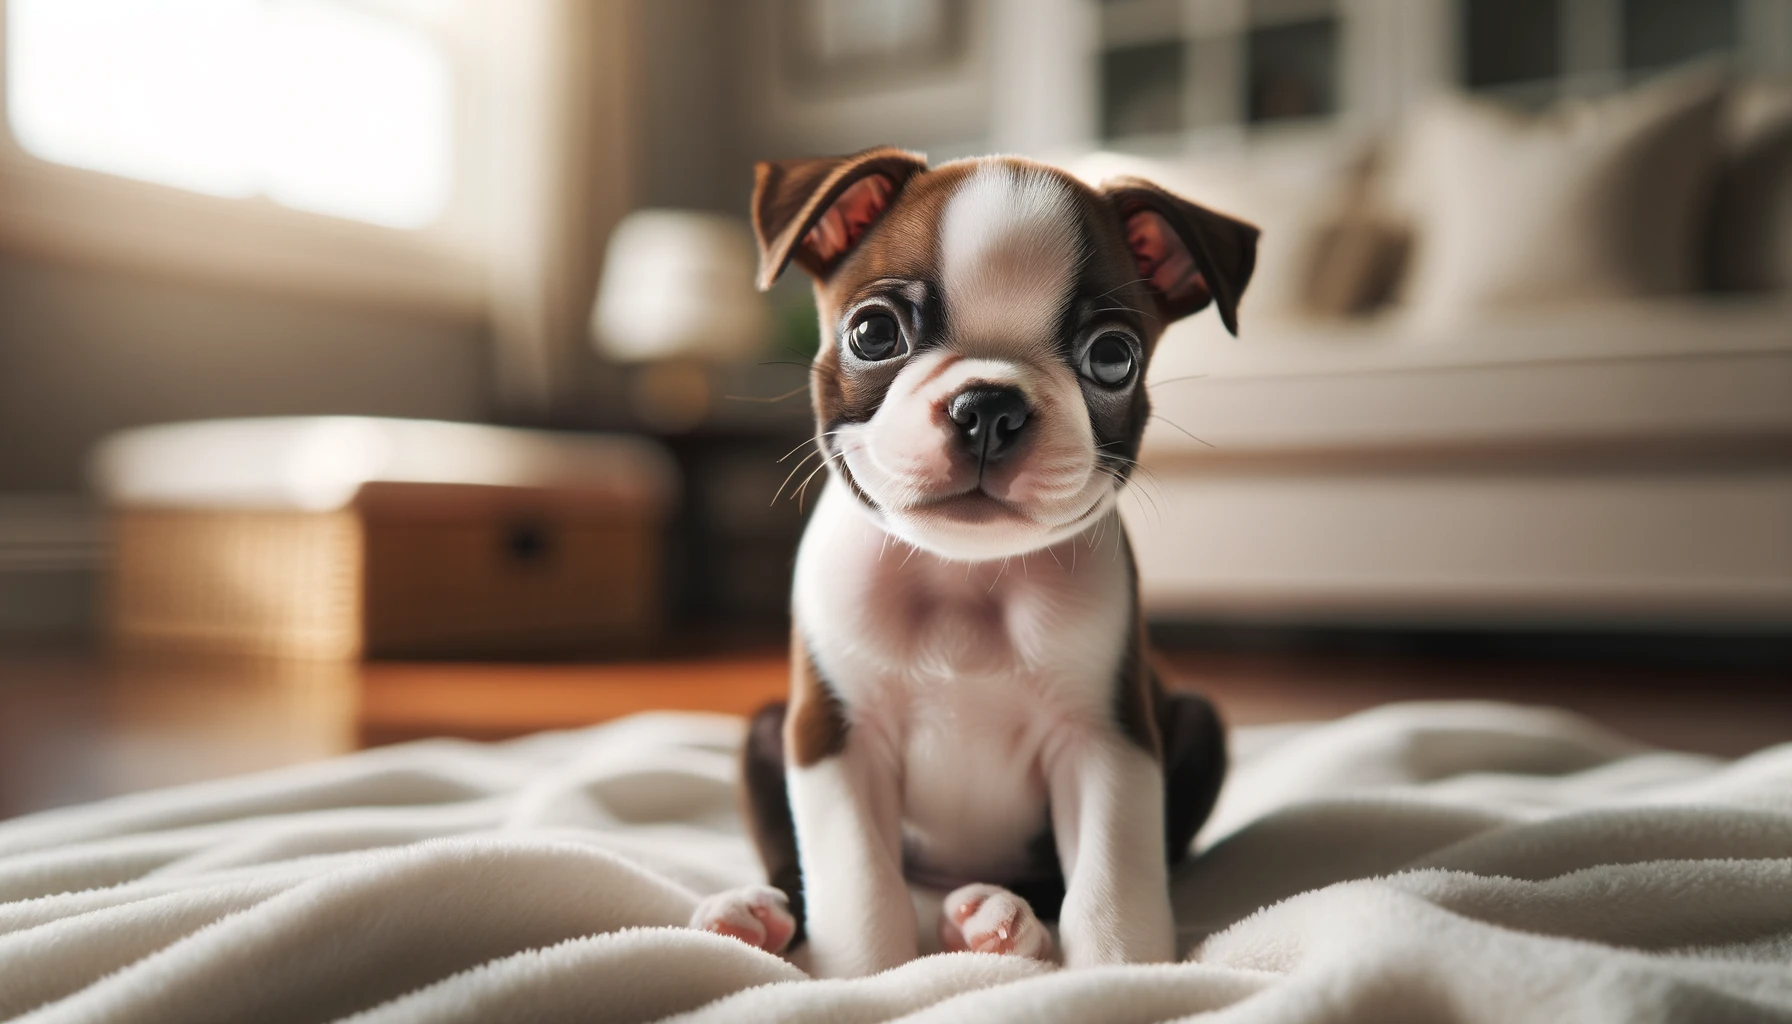 Planning Your Puppy Purchase: The Expected Costs for a Boston Terrier